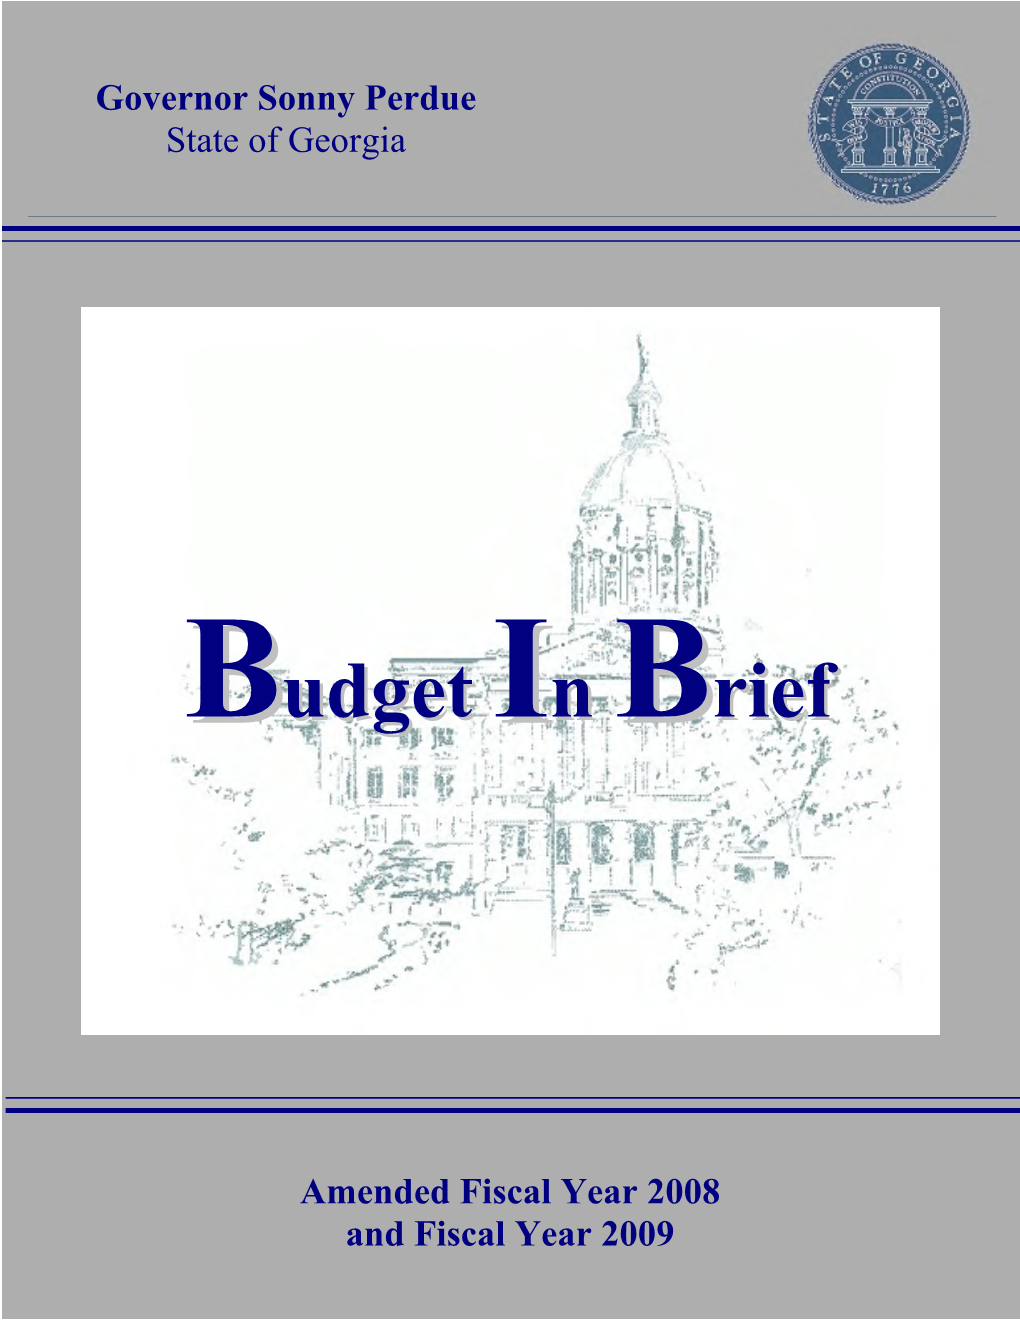 Budget in Brief ______